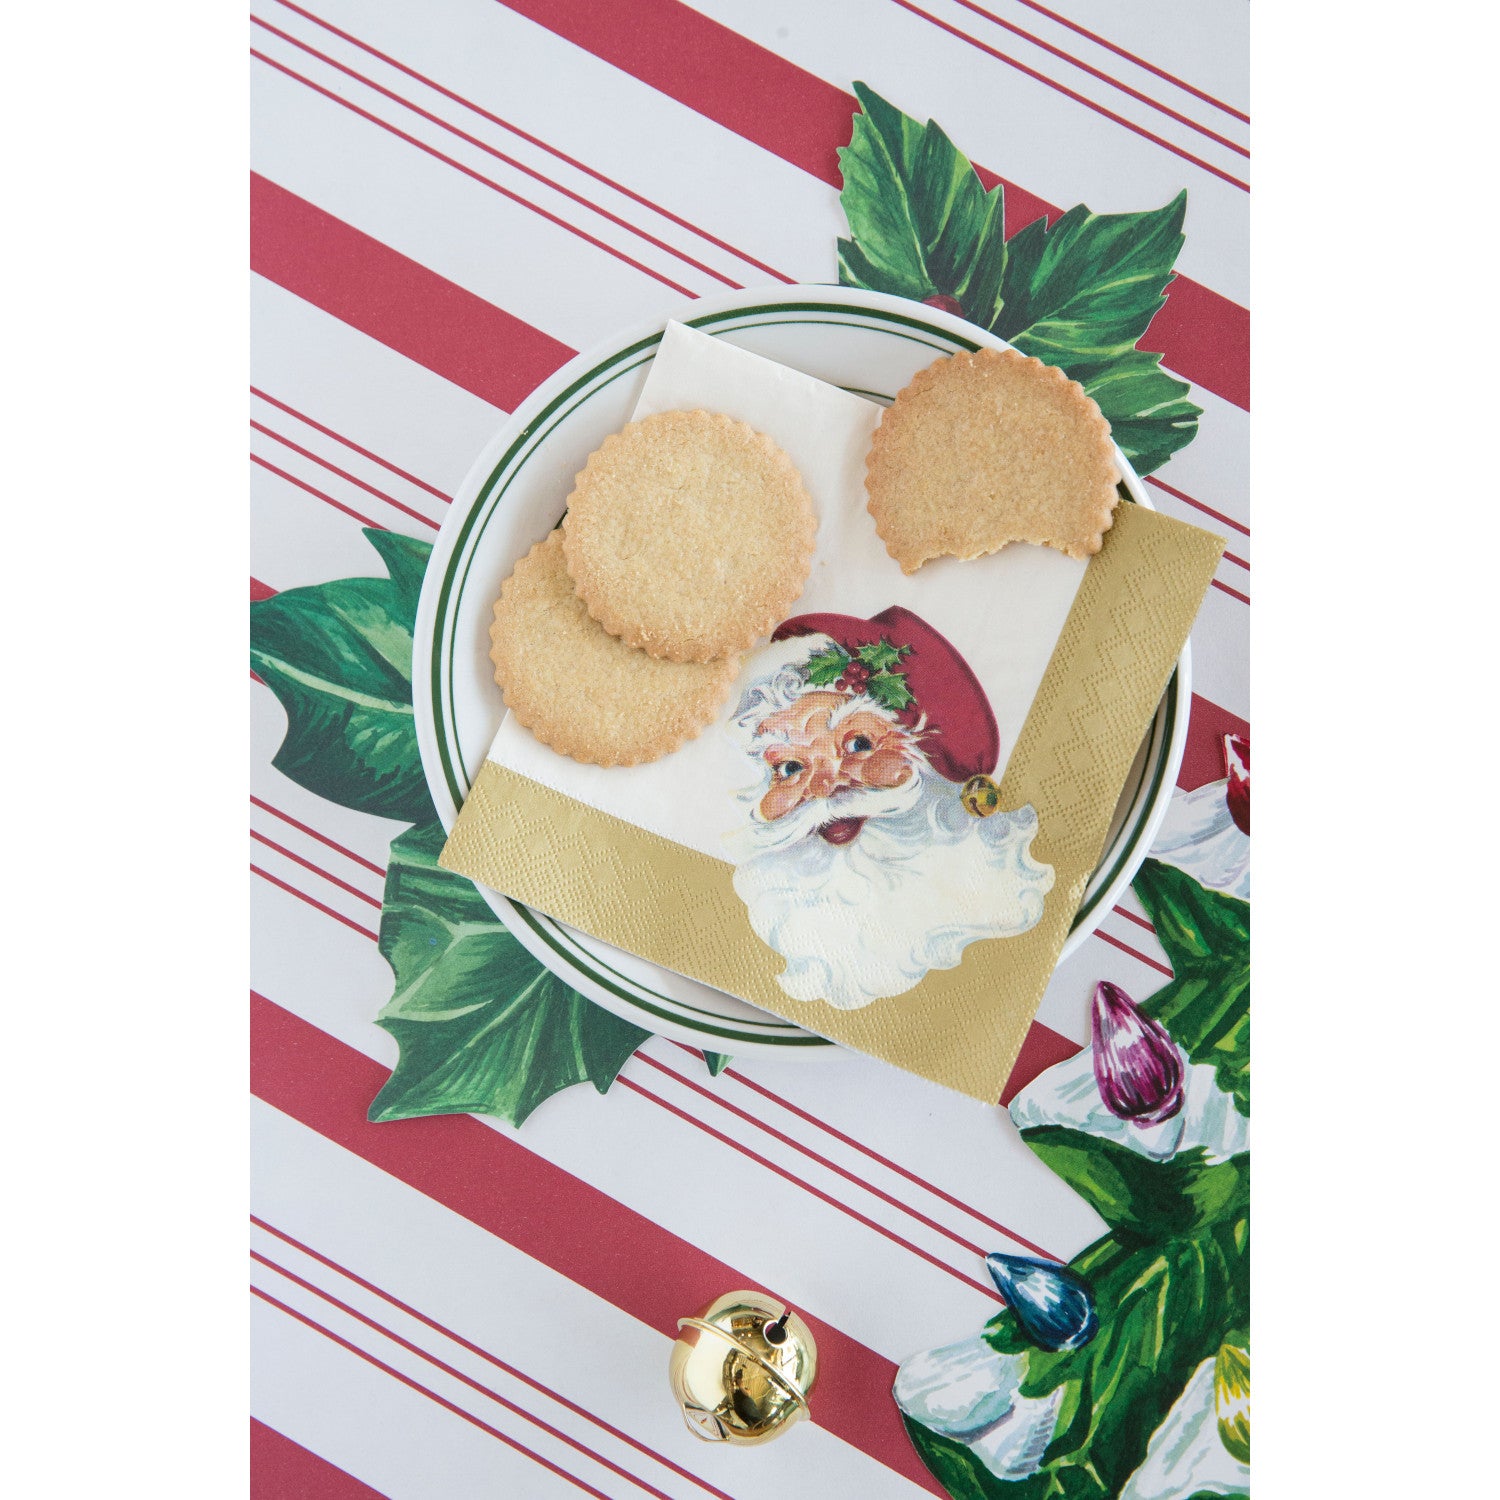 A plate of cookies with a Santa Cocktail Napkin on a festive holiday table.